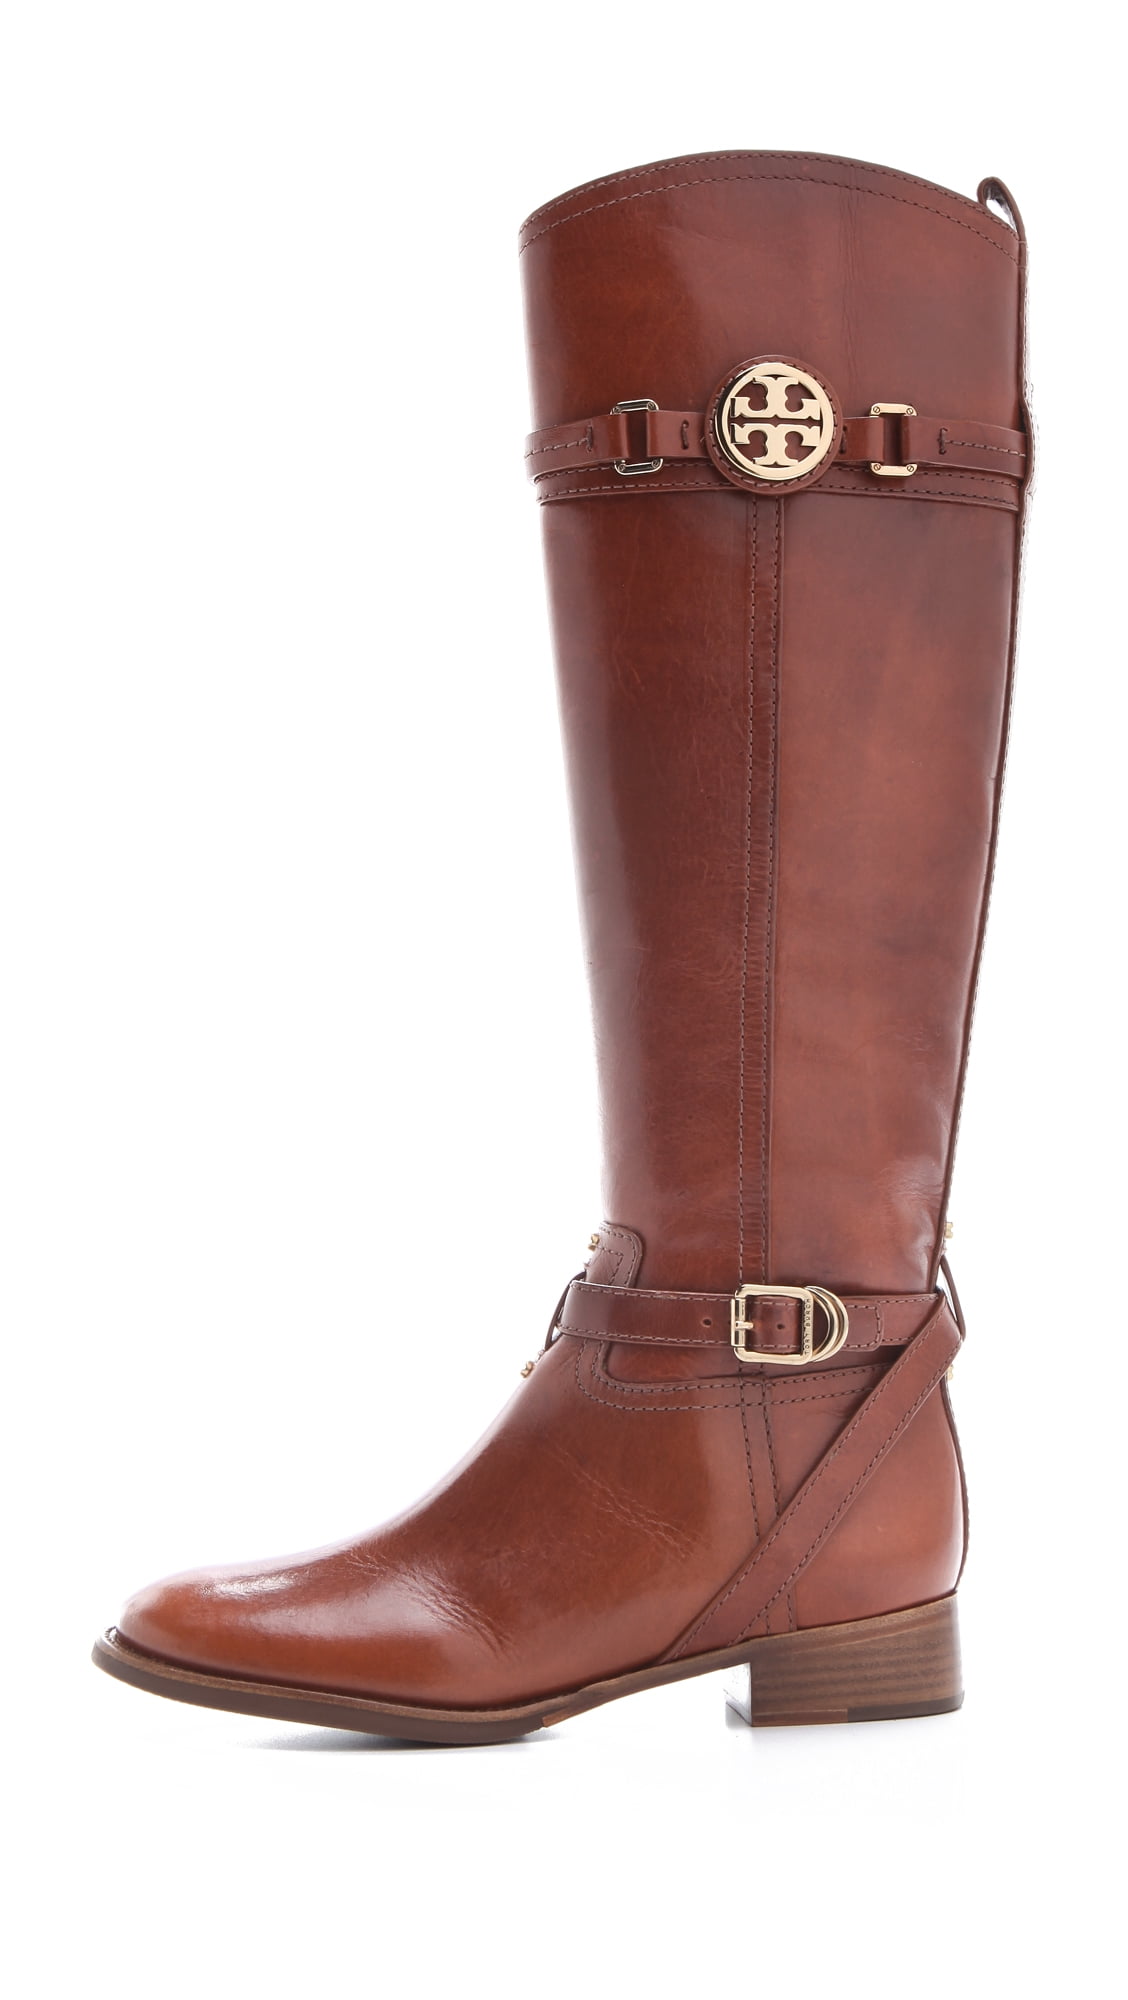 tory burch leather riding boots